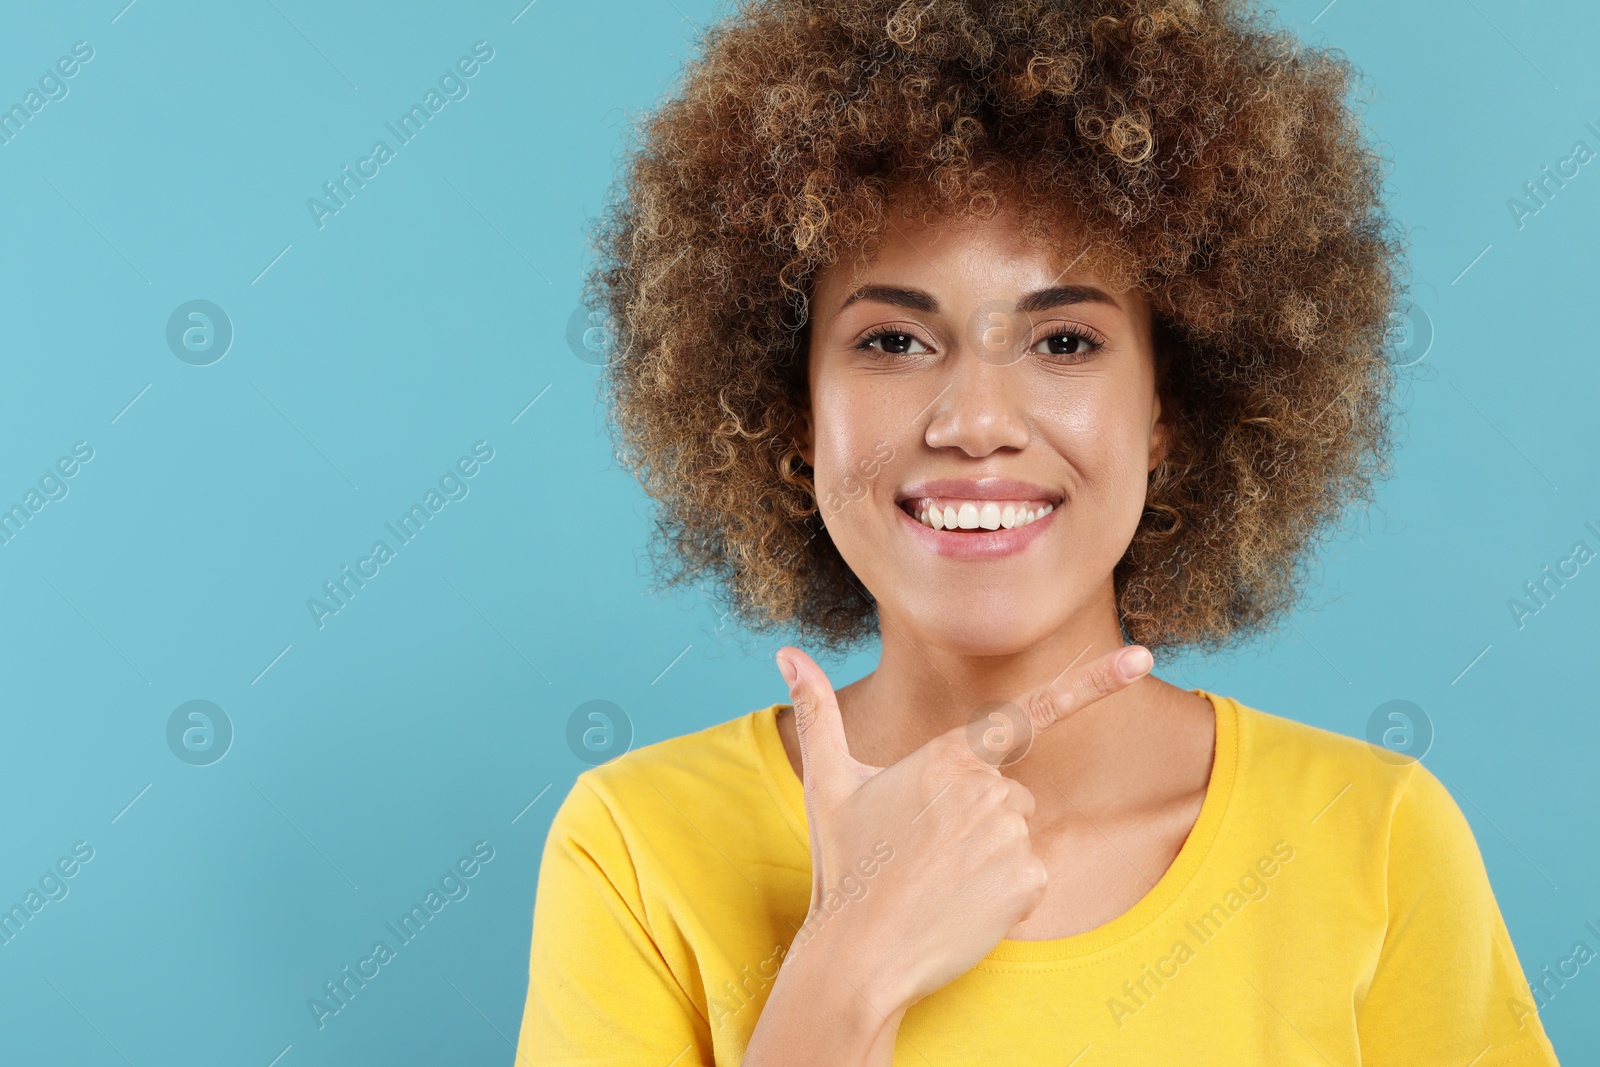 Photo of Woman showing her clean teeth and smiling on light blue background, space for text